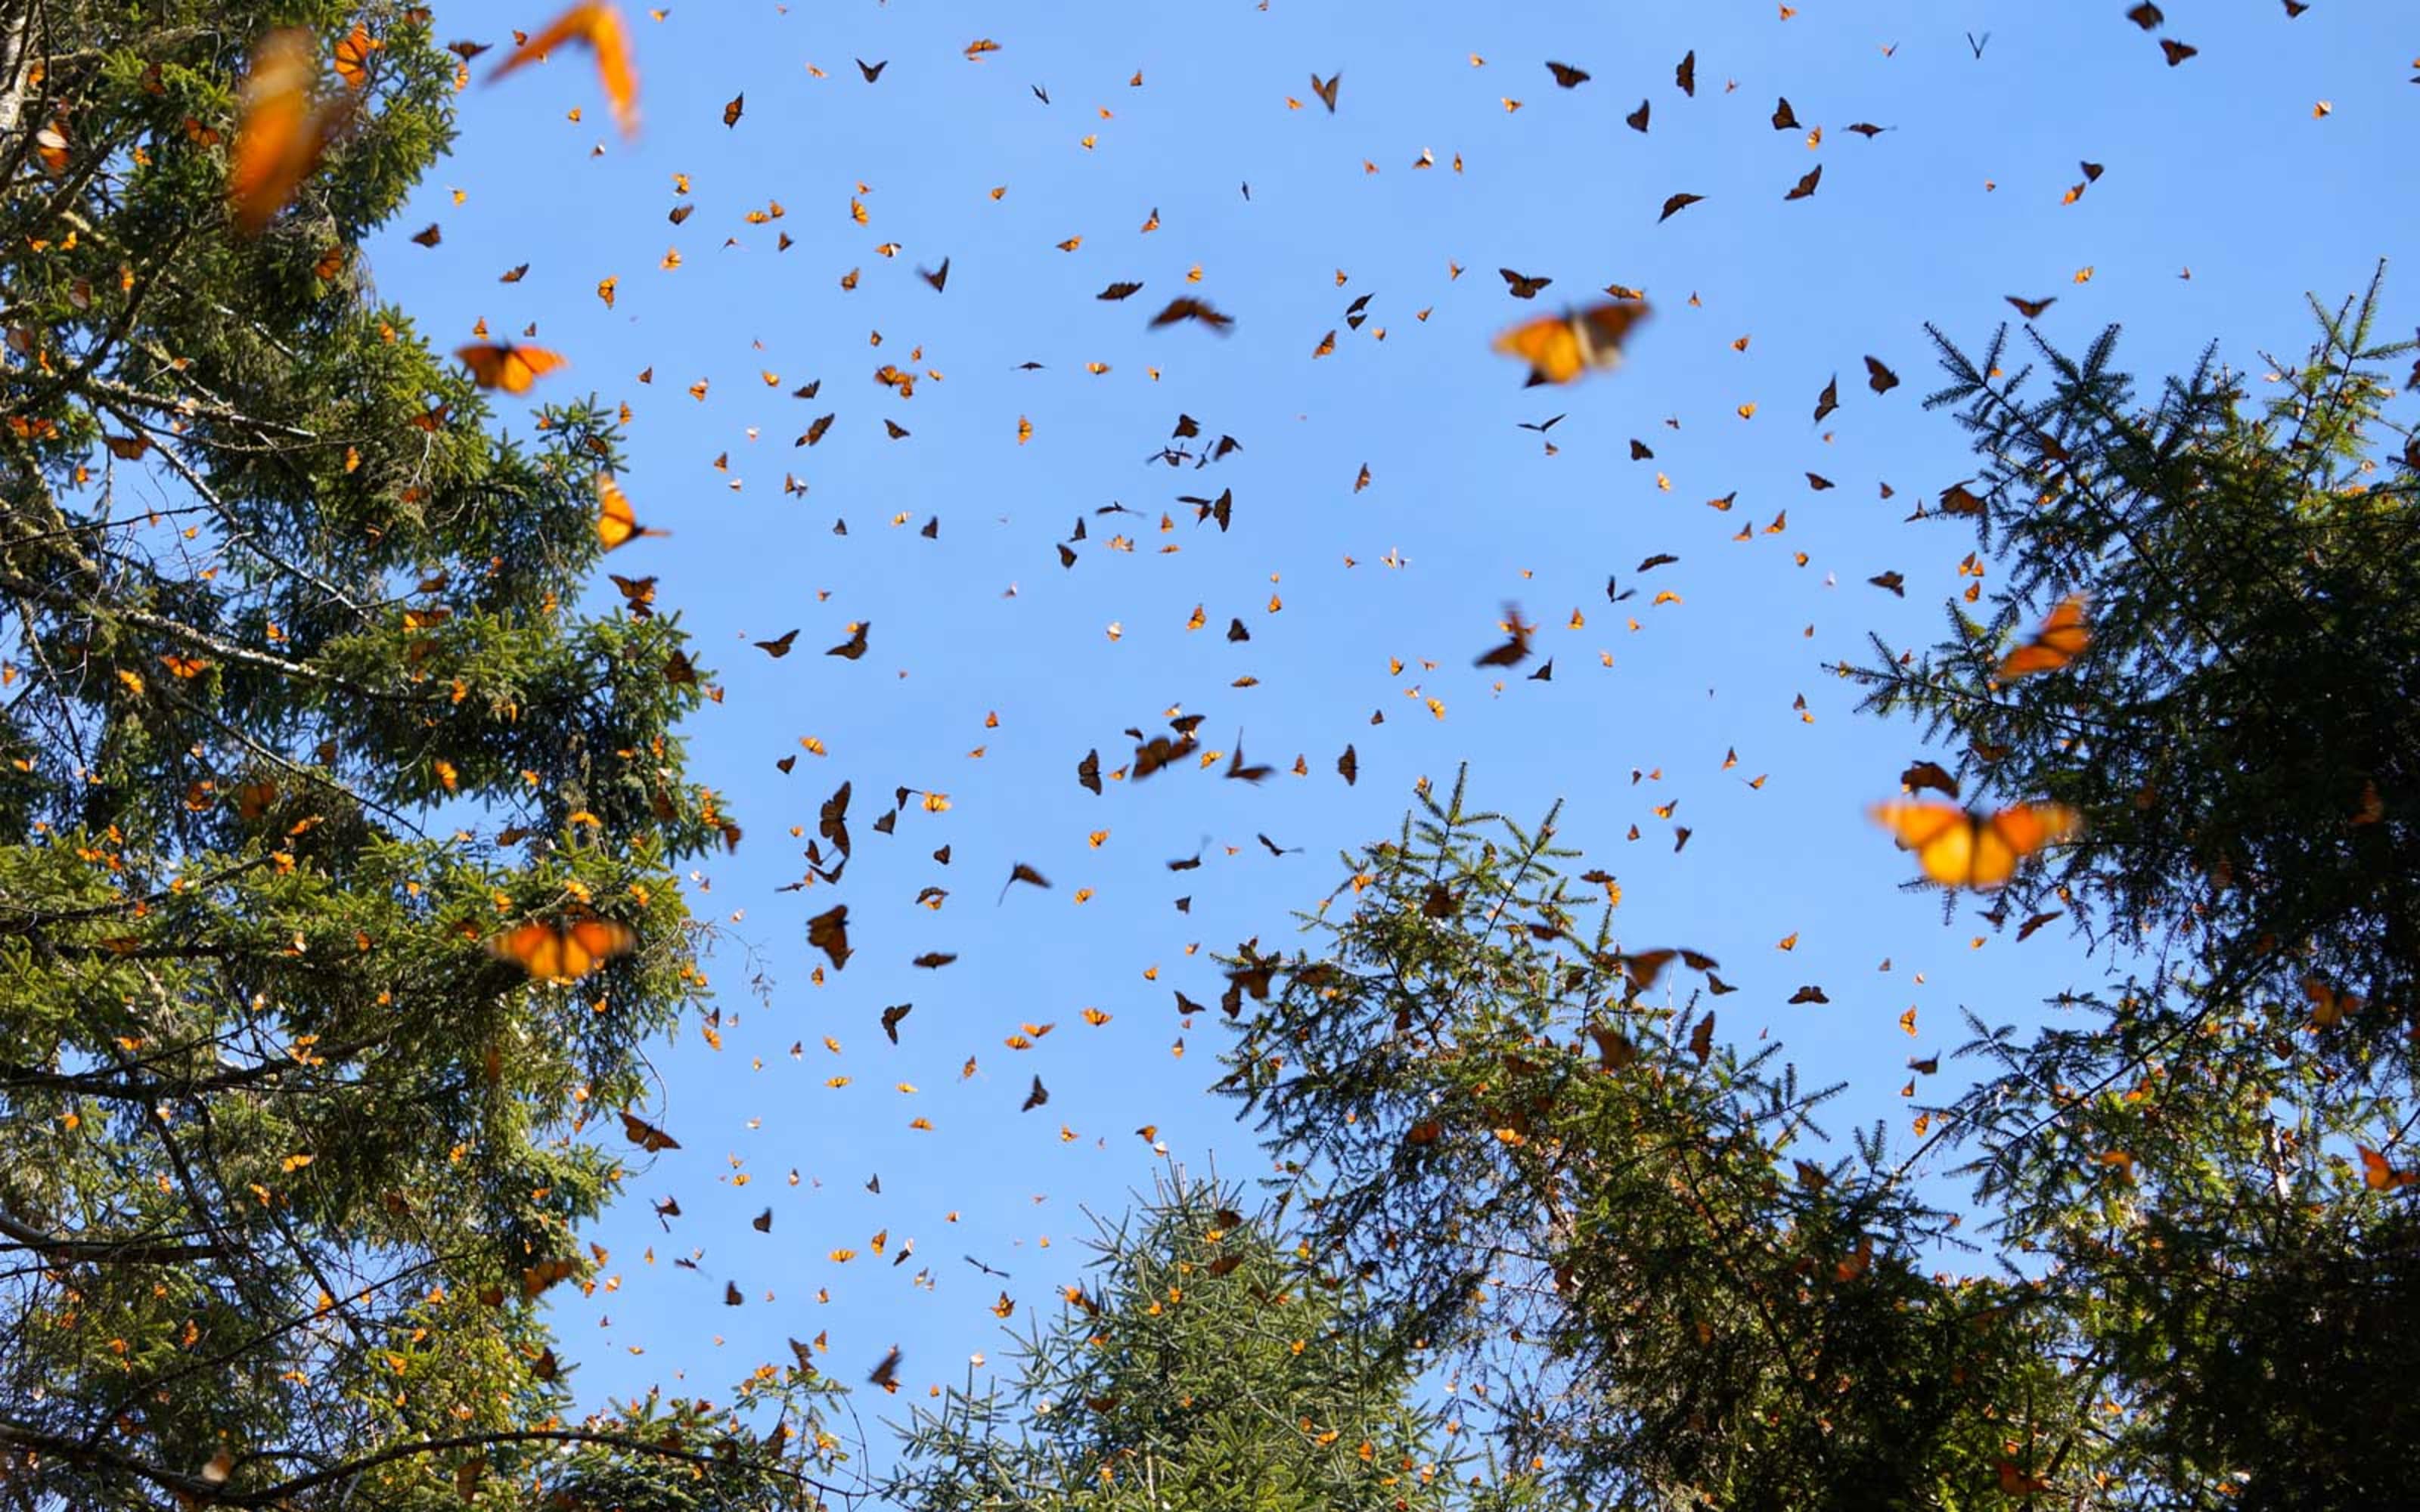 #NATUREALERT: A Massive Migration of Butterflies is Coming Through Northern California and Oregon